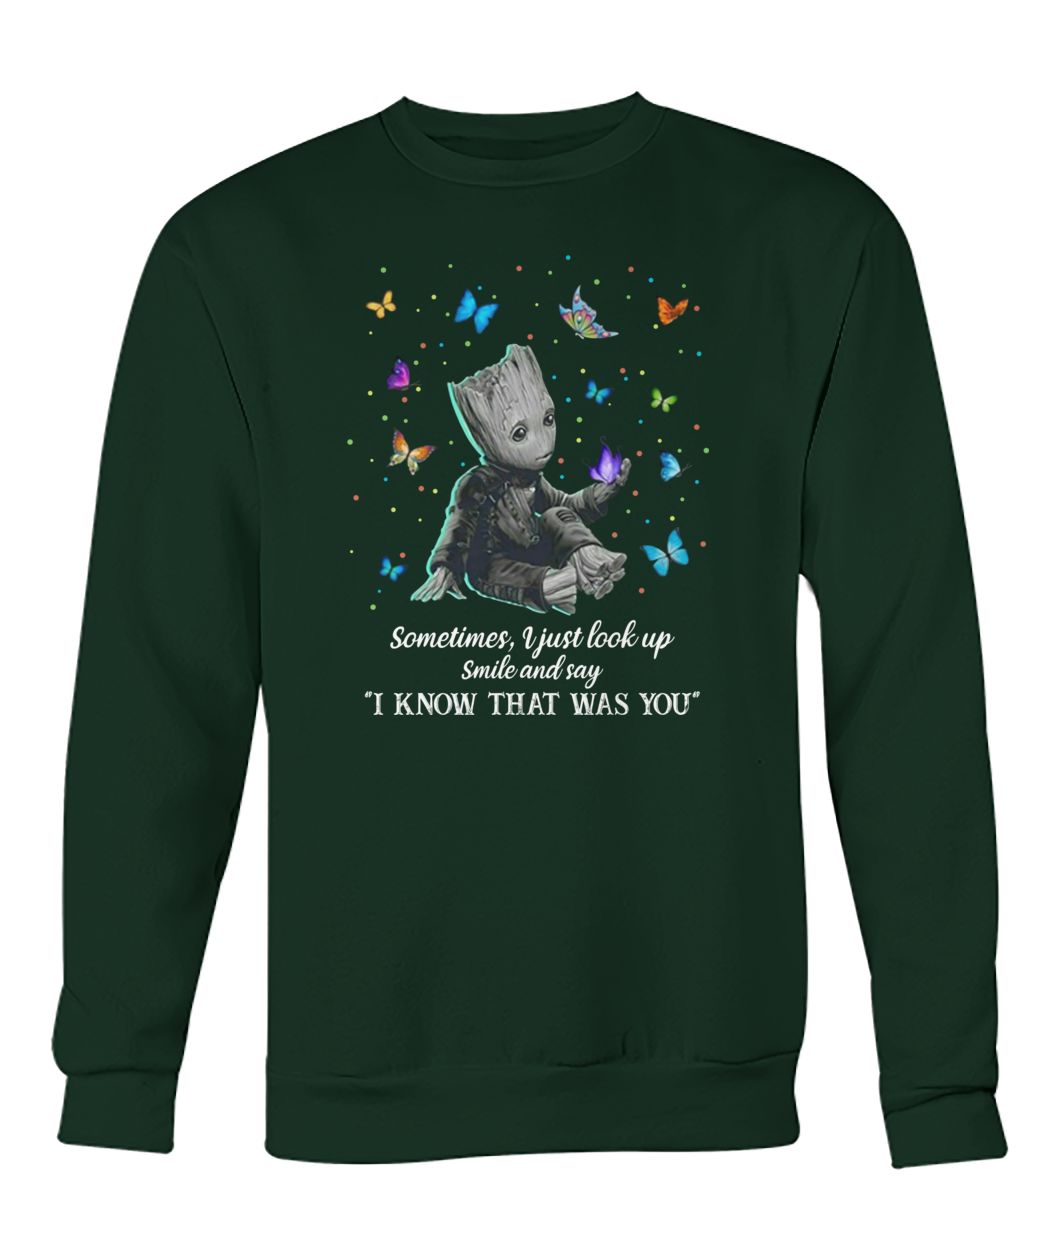 Baby groot sometimes I just look up smile and say I know that was you crew neck sweatshirt